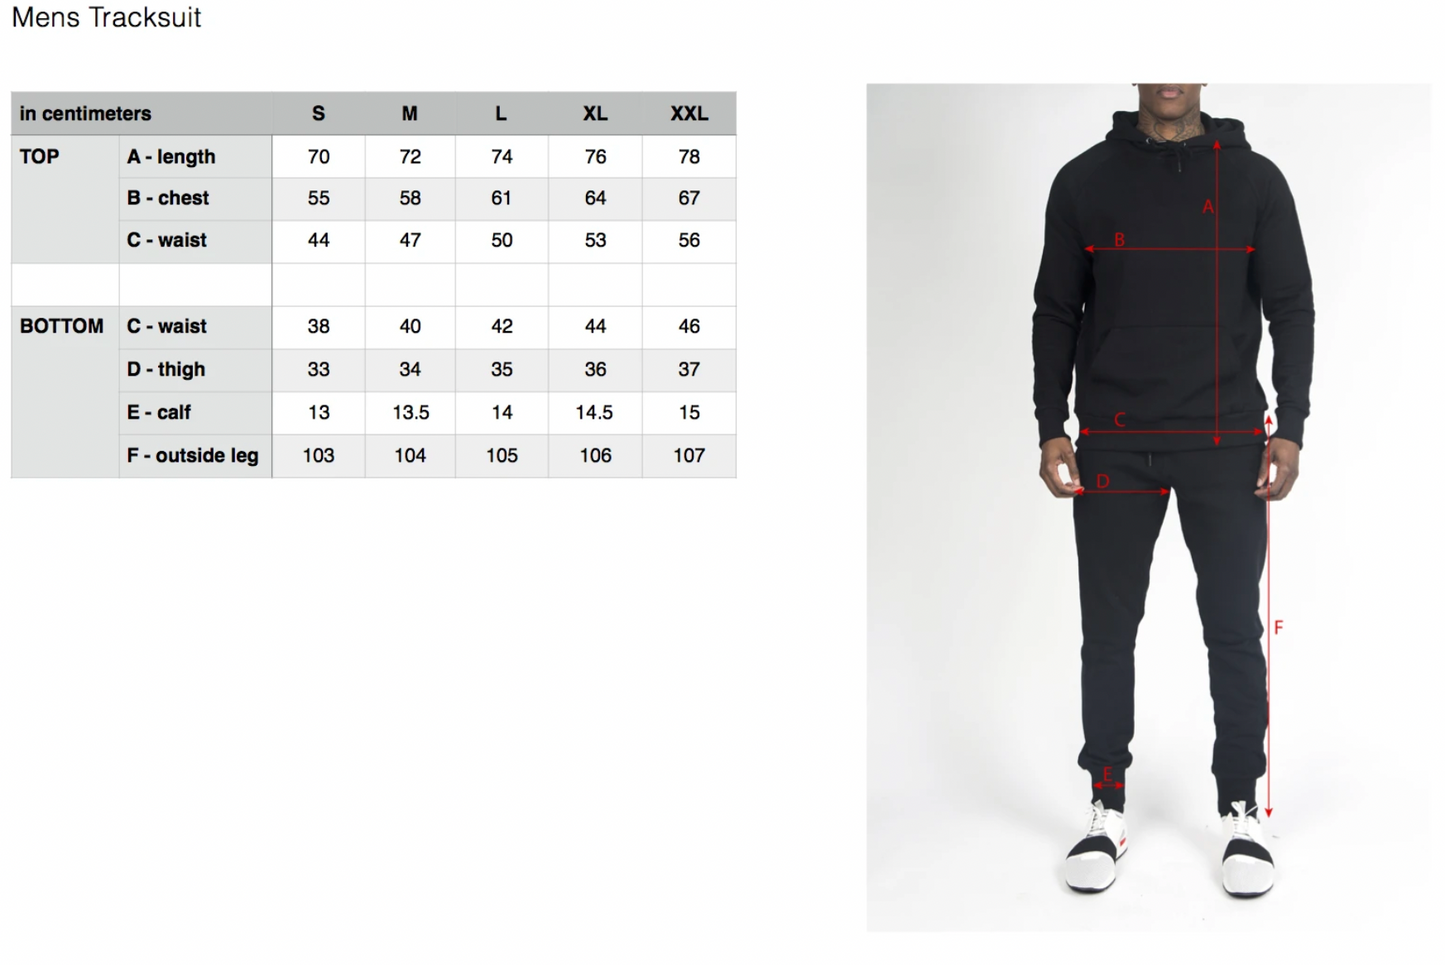 Trapstar Shooters Hoodie And Pants Tracksuit - BLACK/ICE FLAVOURS